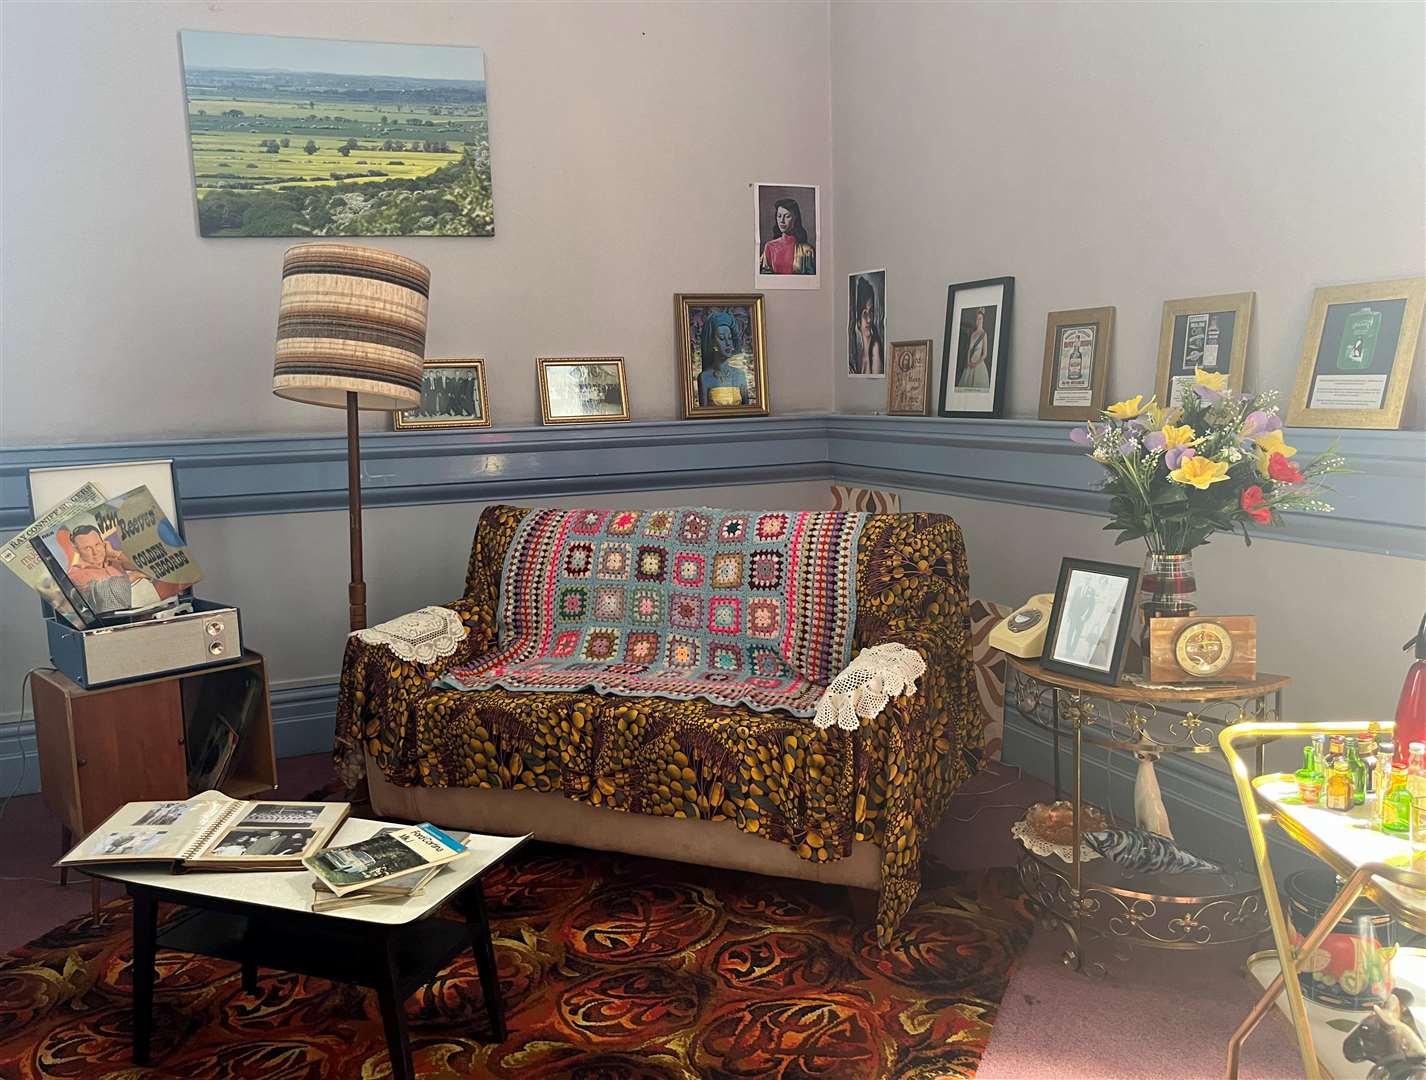 A replica of a typical front room in a house of a black family in Britain at the time